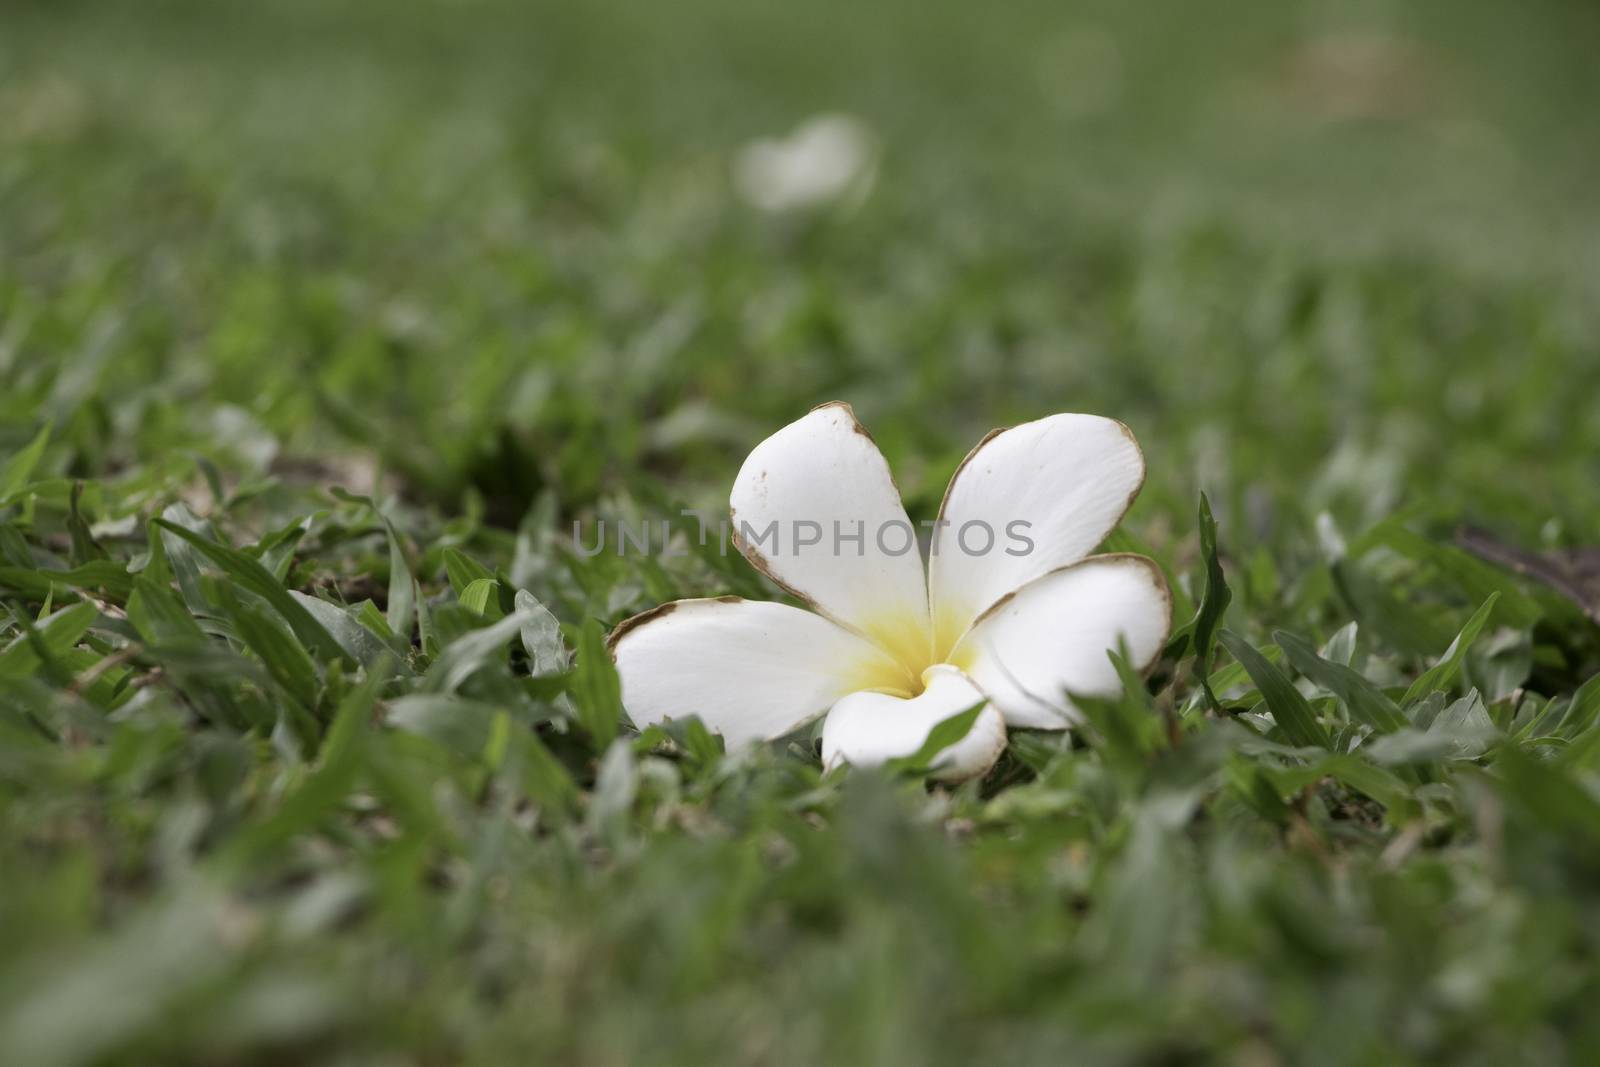 Frangipani on the green grass field in the park